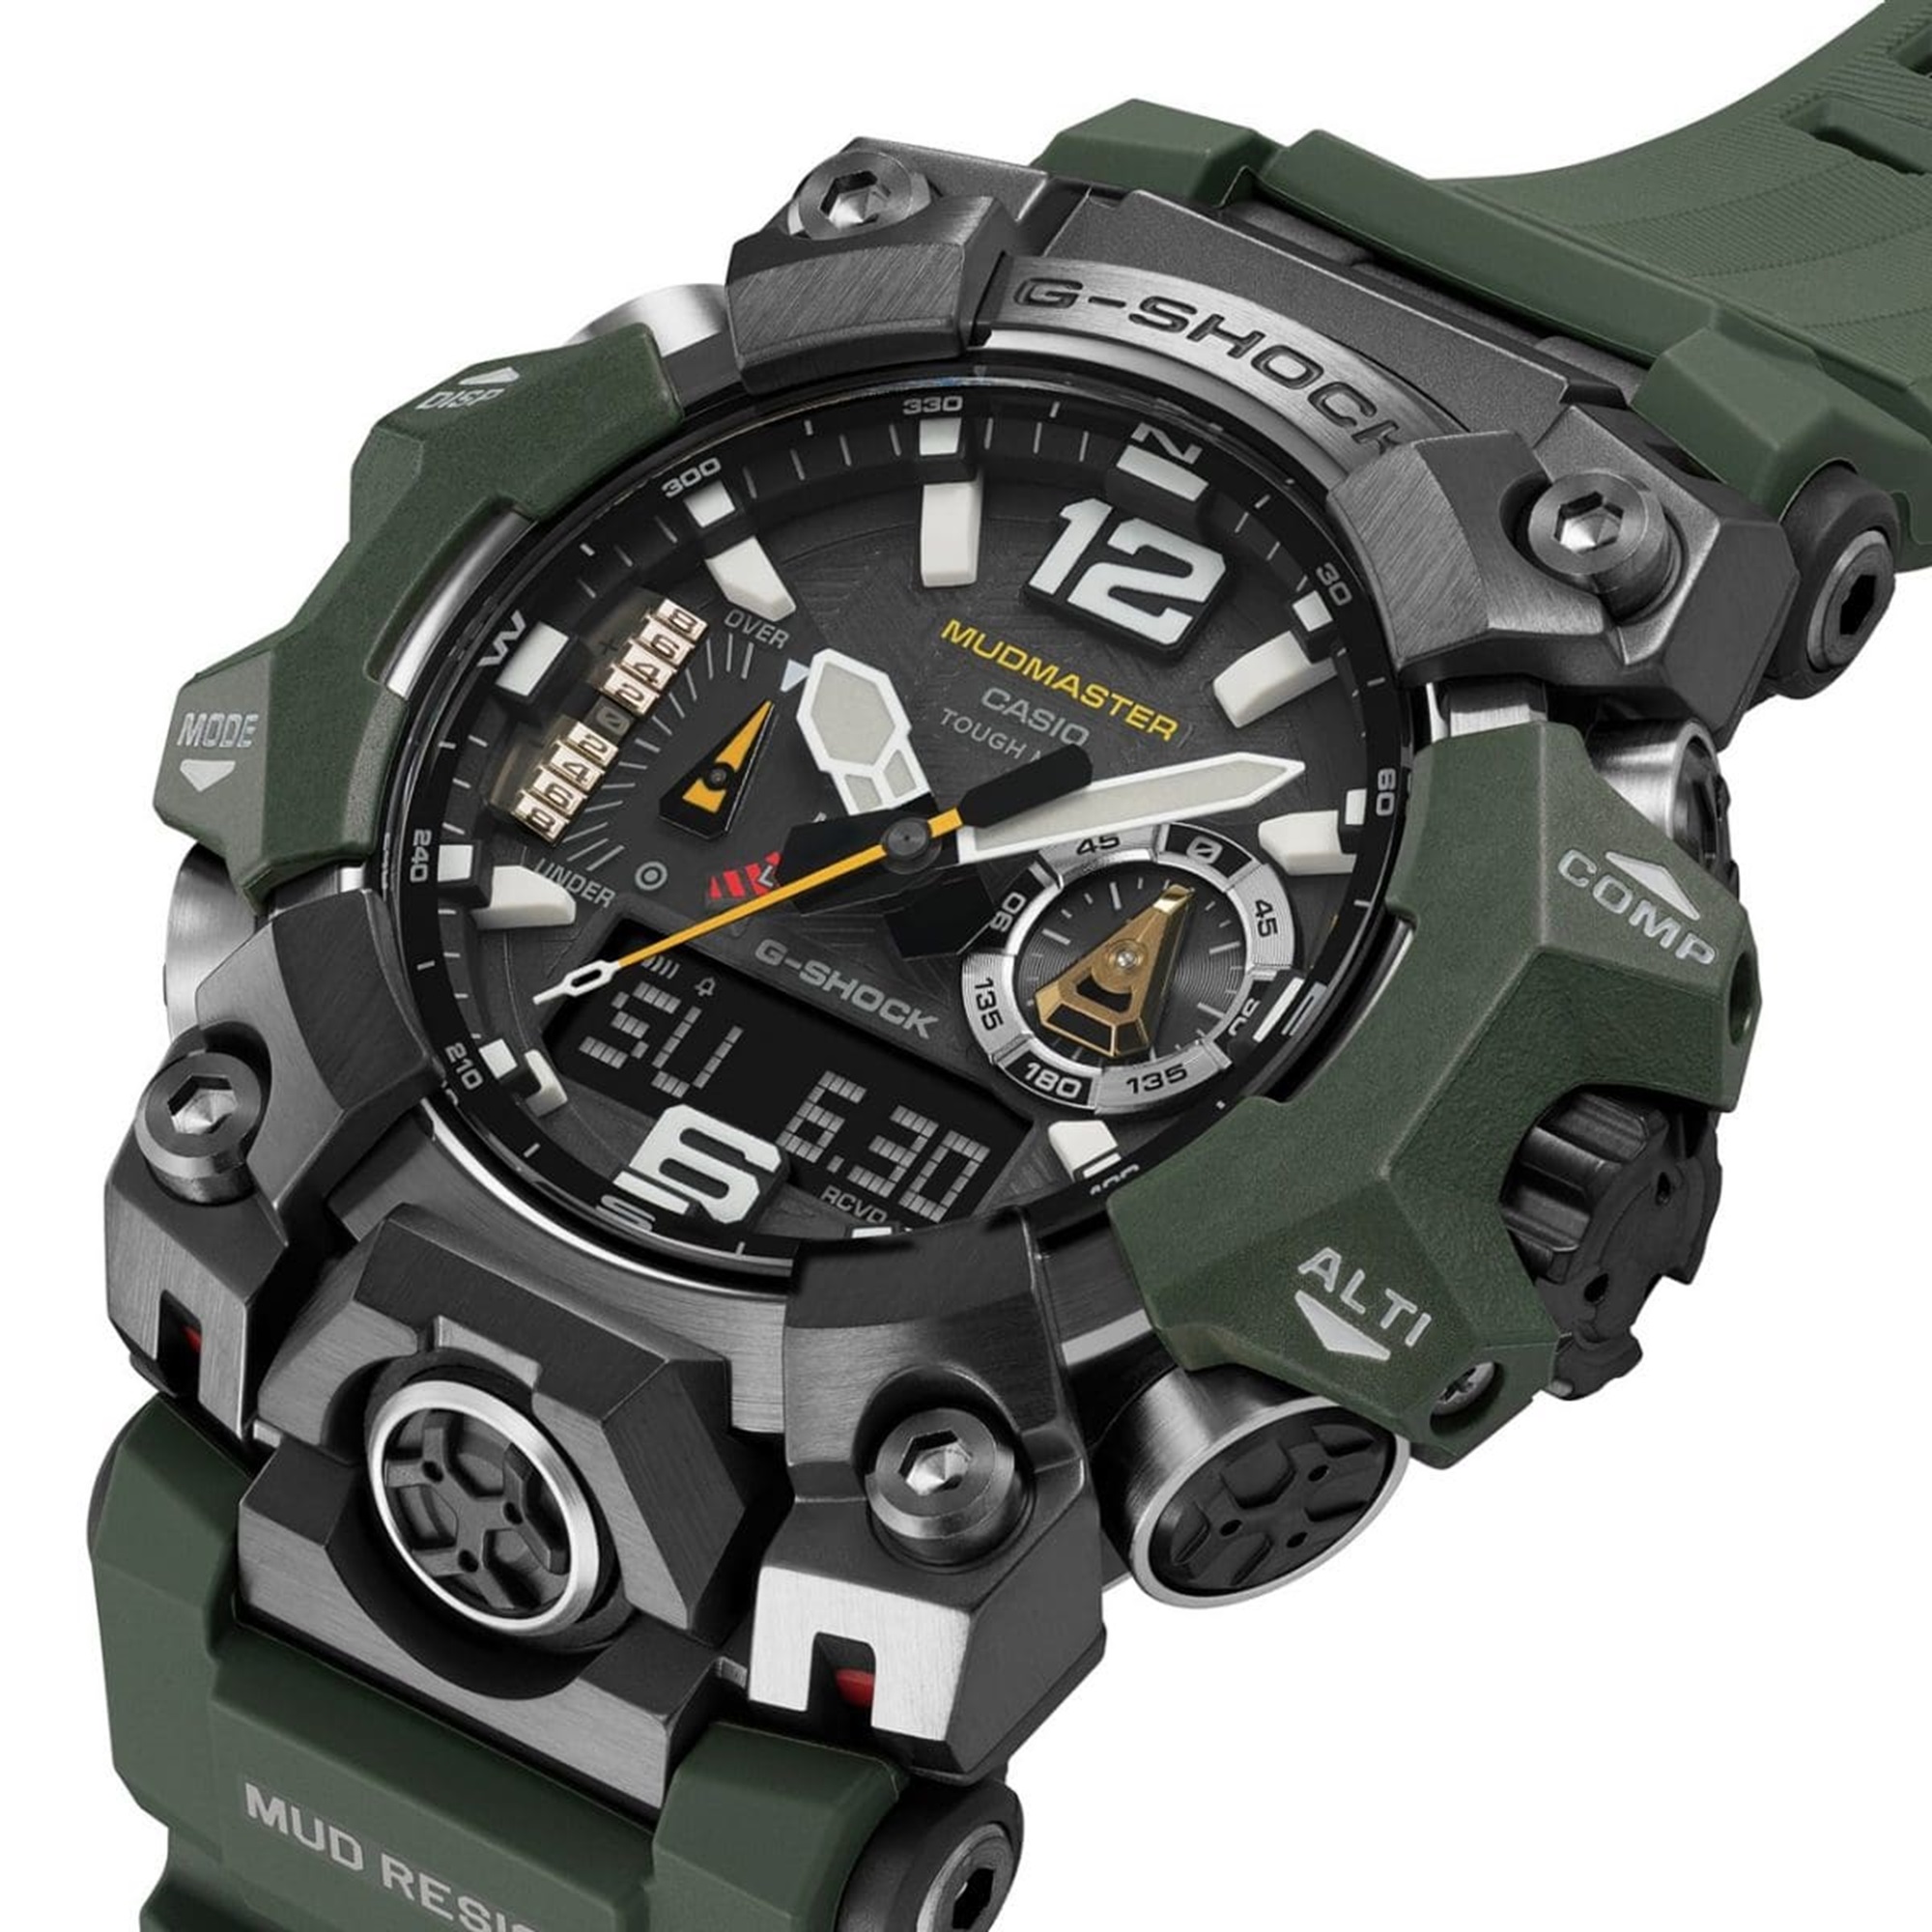 Tough Watches Made for Extreme Conditions - Chrono24 Magazine